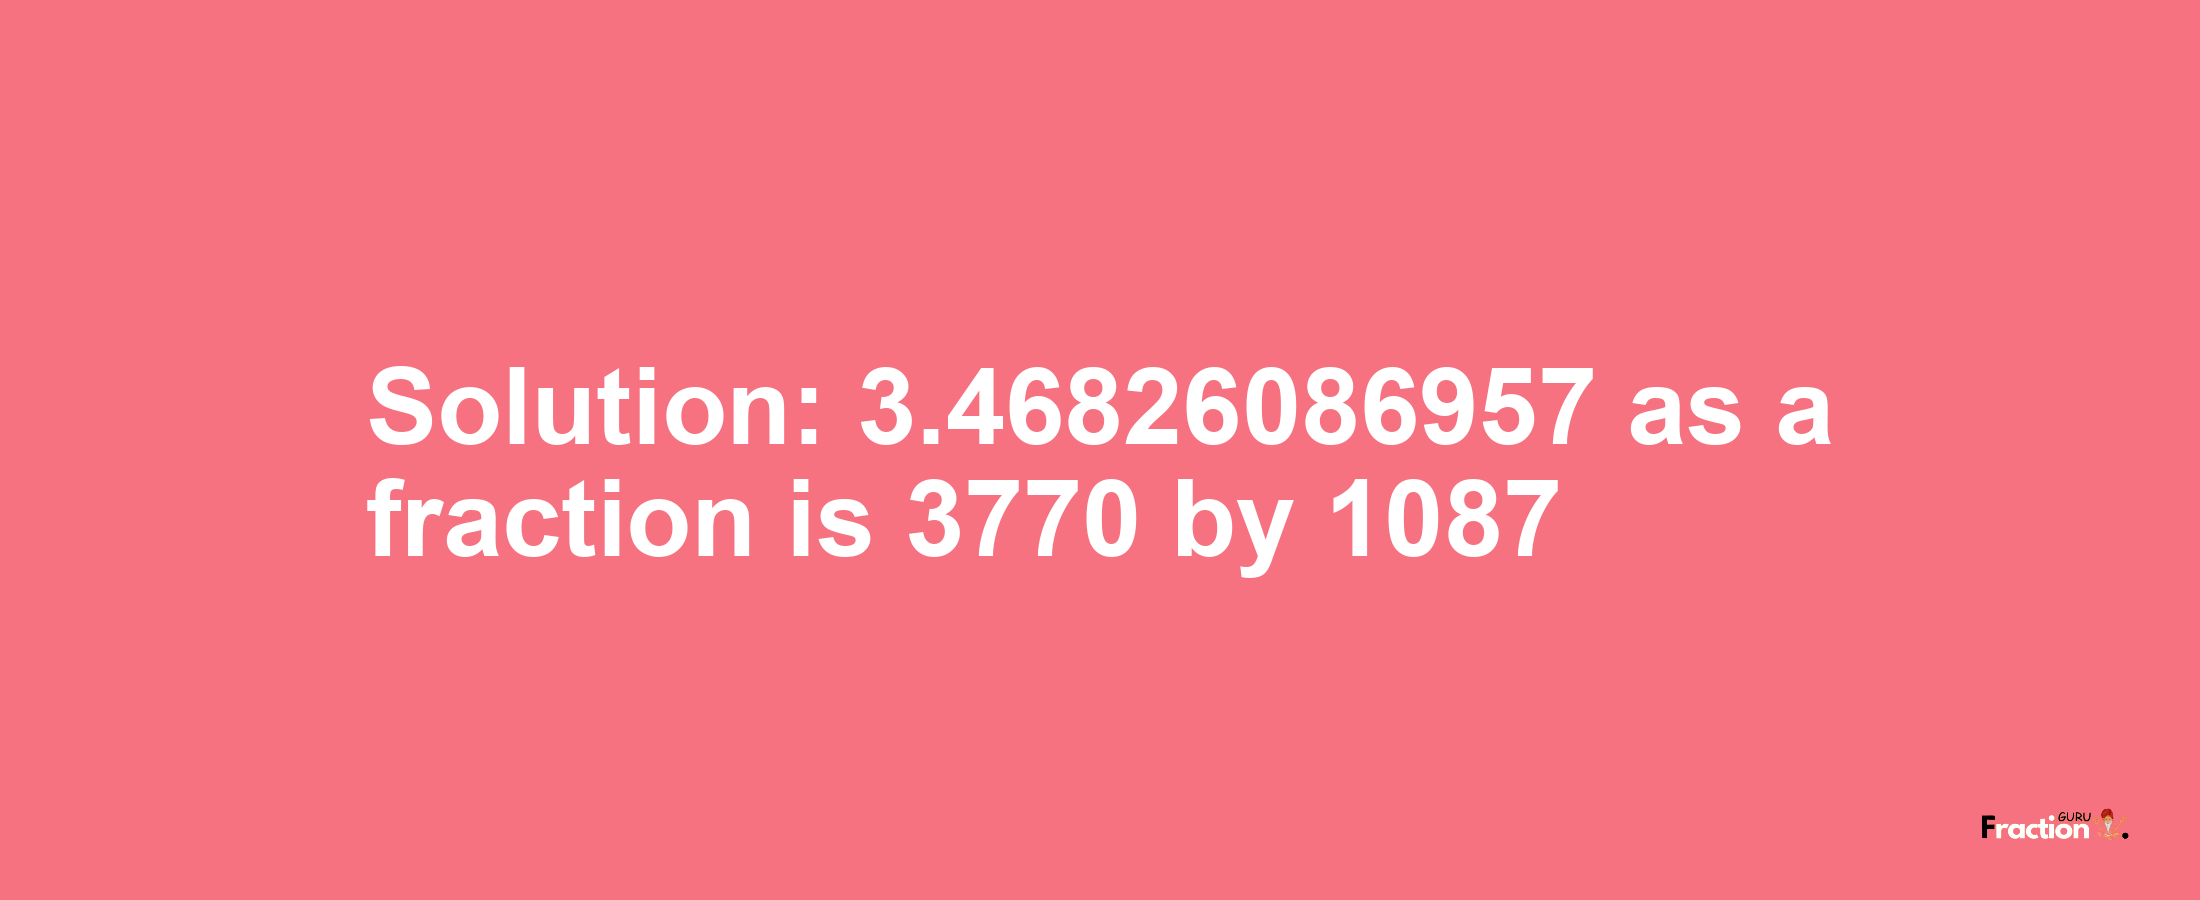 Solution:3.46826086957 as a fraction is 3770/1087